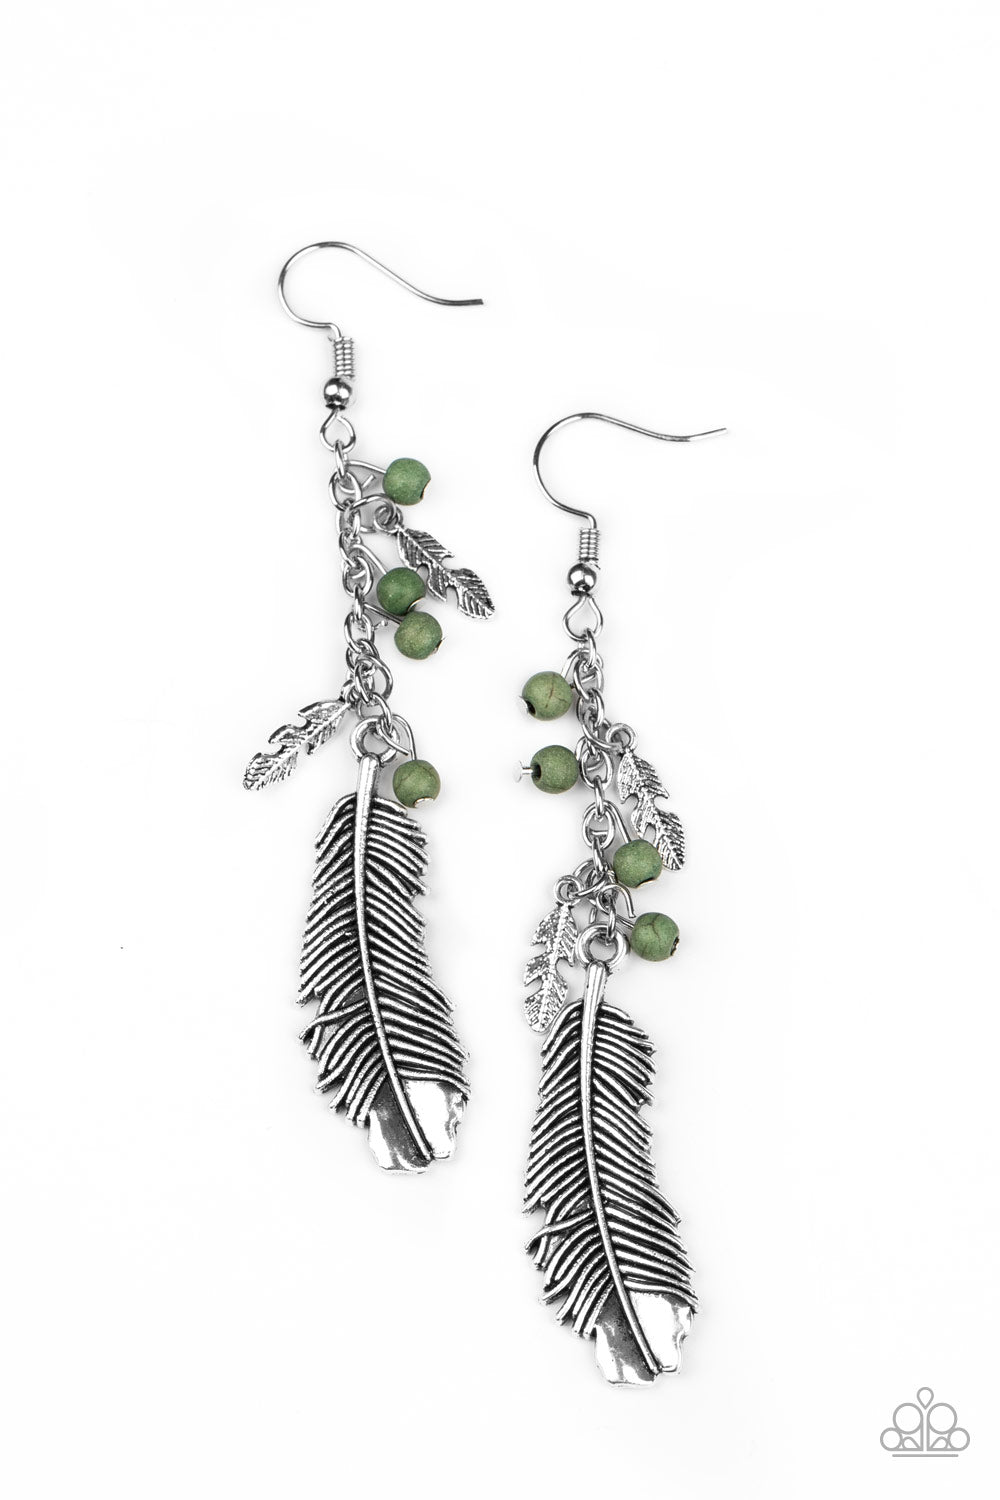 Find Your Flock - Green Earring Paparazzi Accessories Feather Like Earring